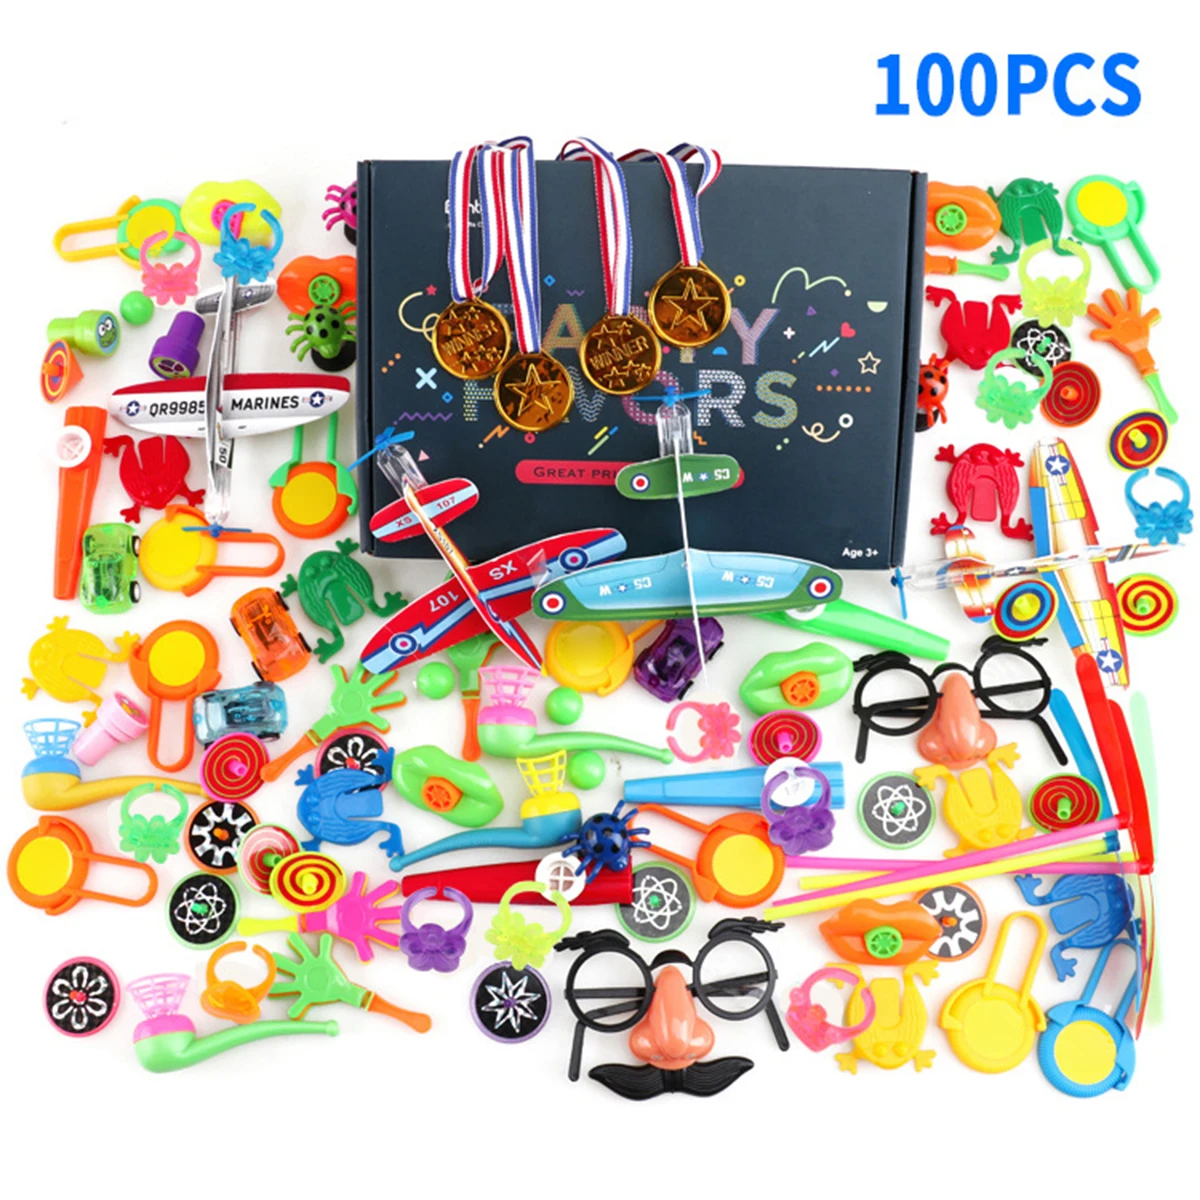 

100PCS Party Toys Assortment Party Favors for Kids Birthday Party Favor Carnival Prizes Box Goodie Bag Fillers Classroom Rewards